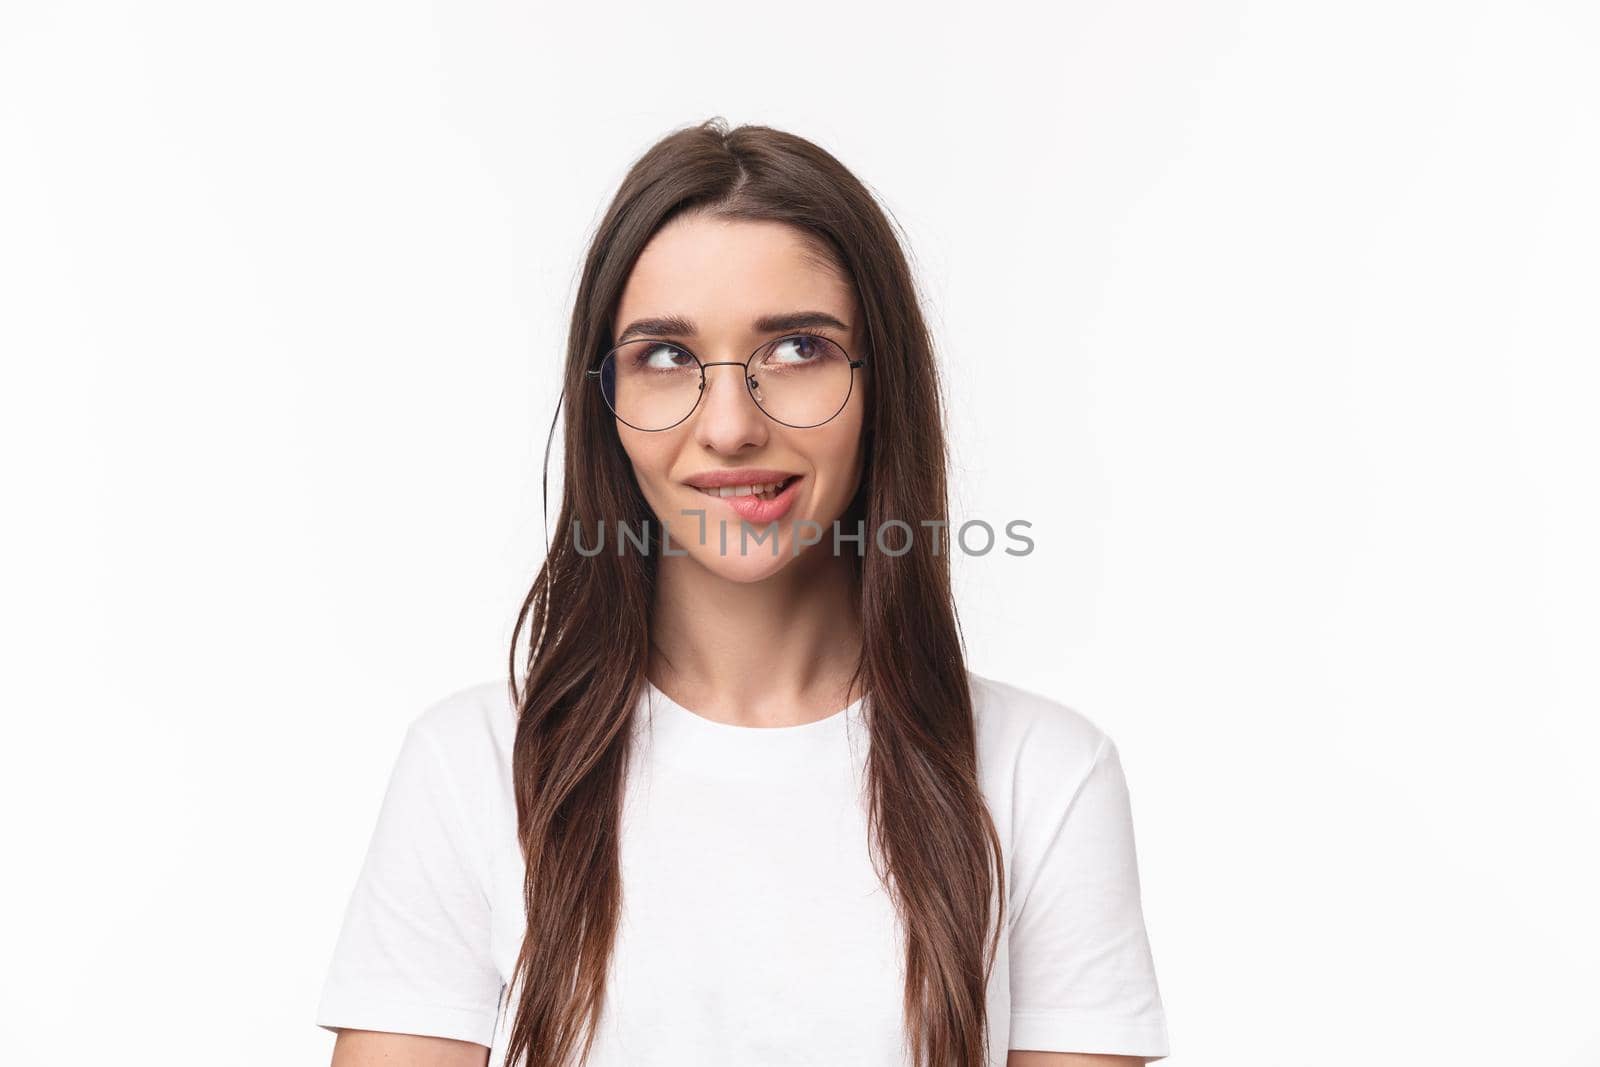 Close-up portrait of sassy and cute young brunette girl, biting lip tempting do something, having plan, look up thoughtful, standing white background, imaging or daydreaming. Copy space